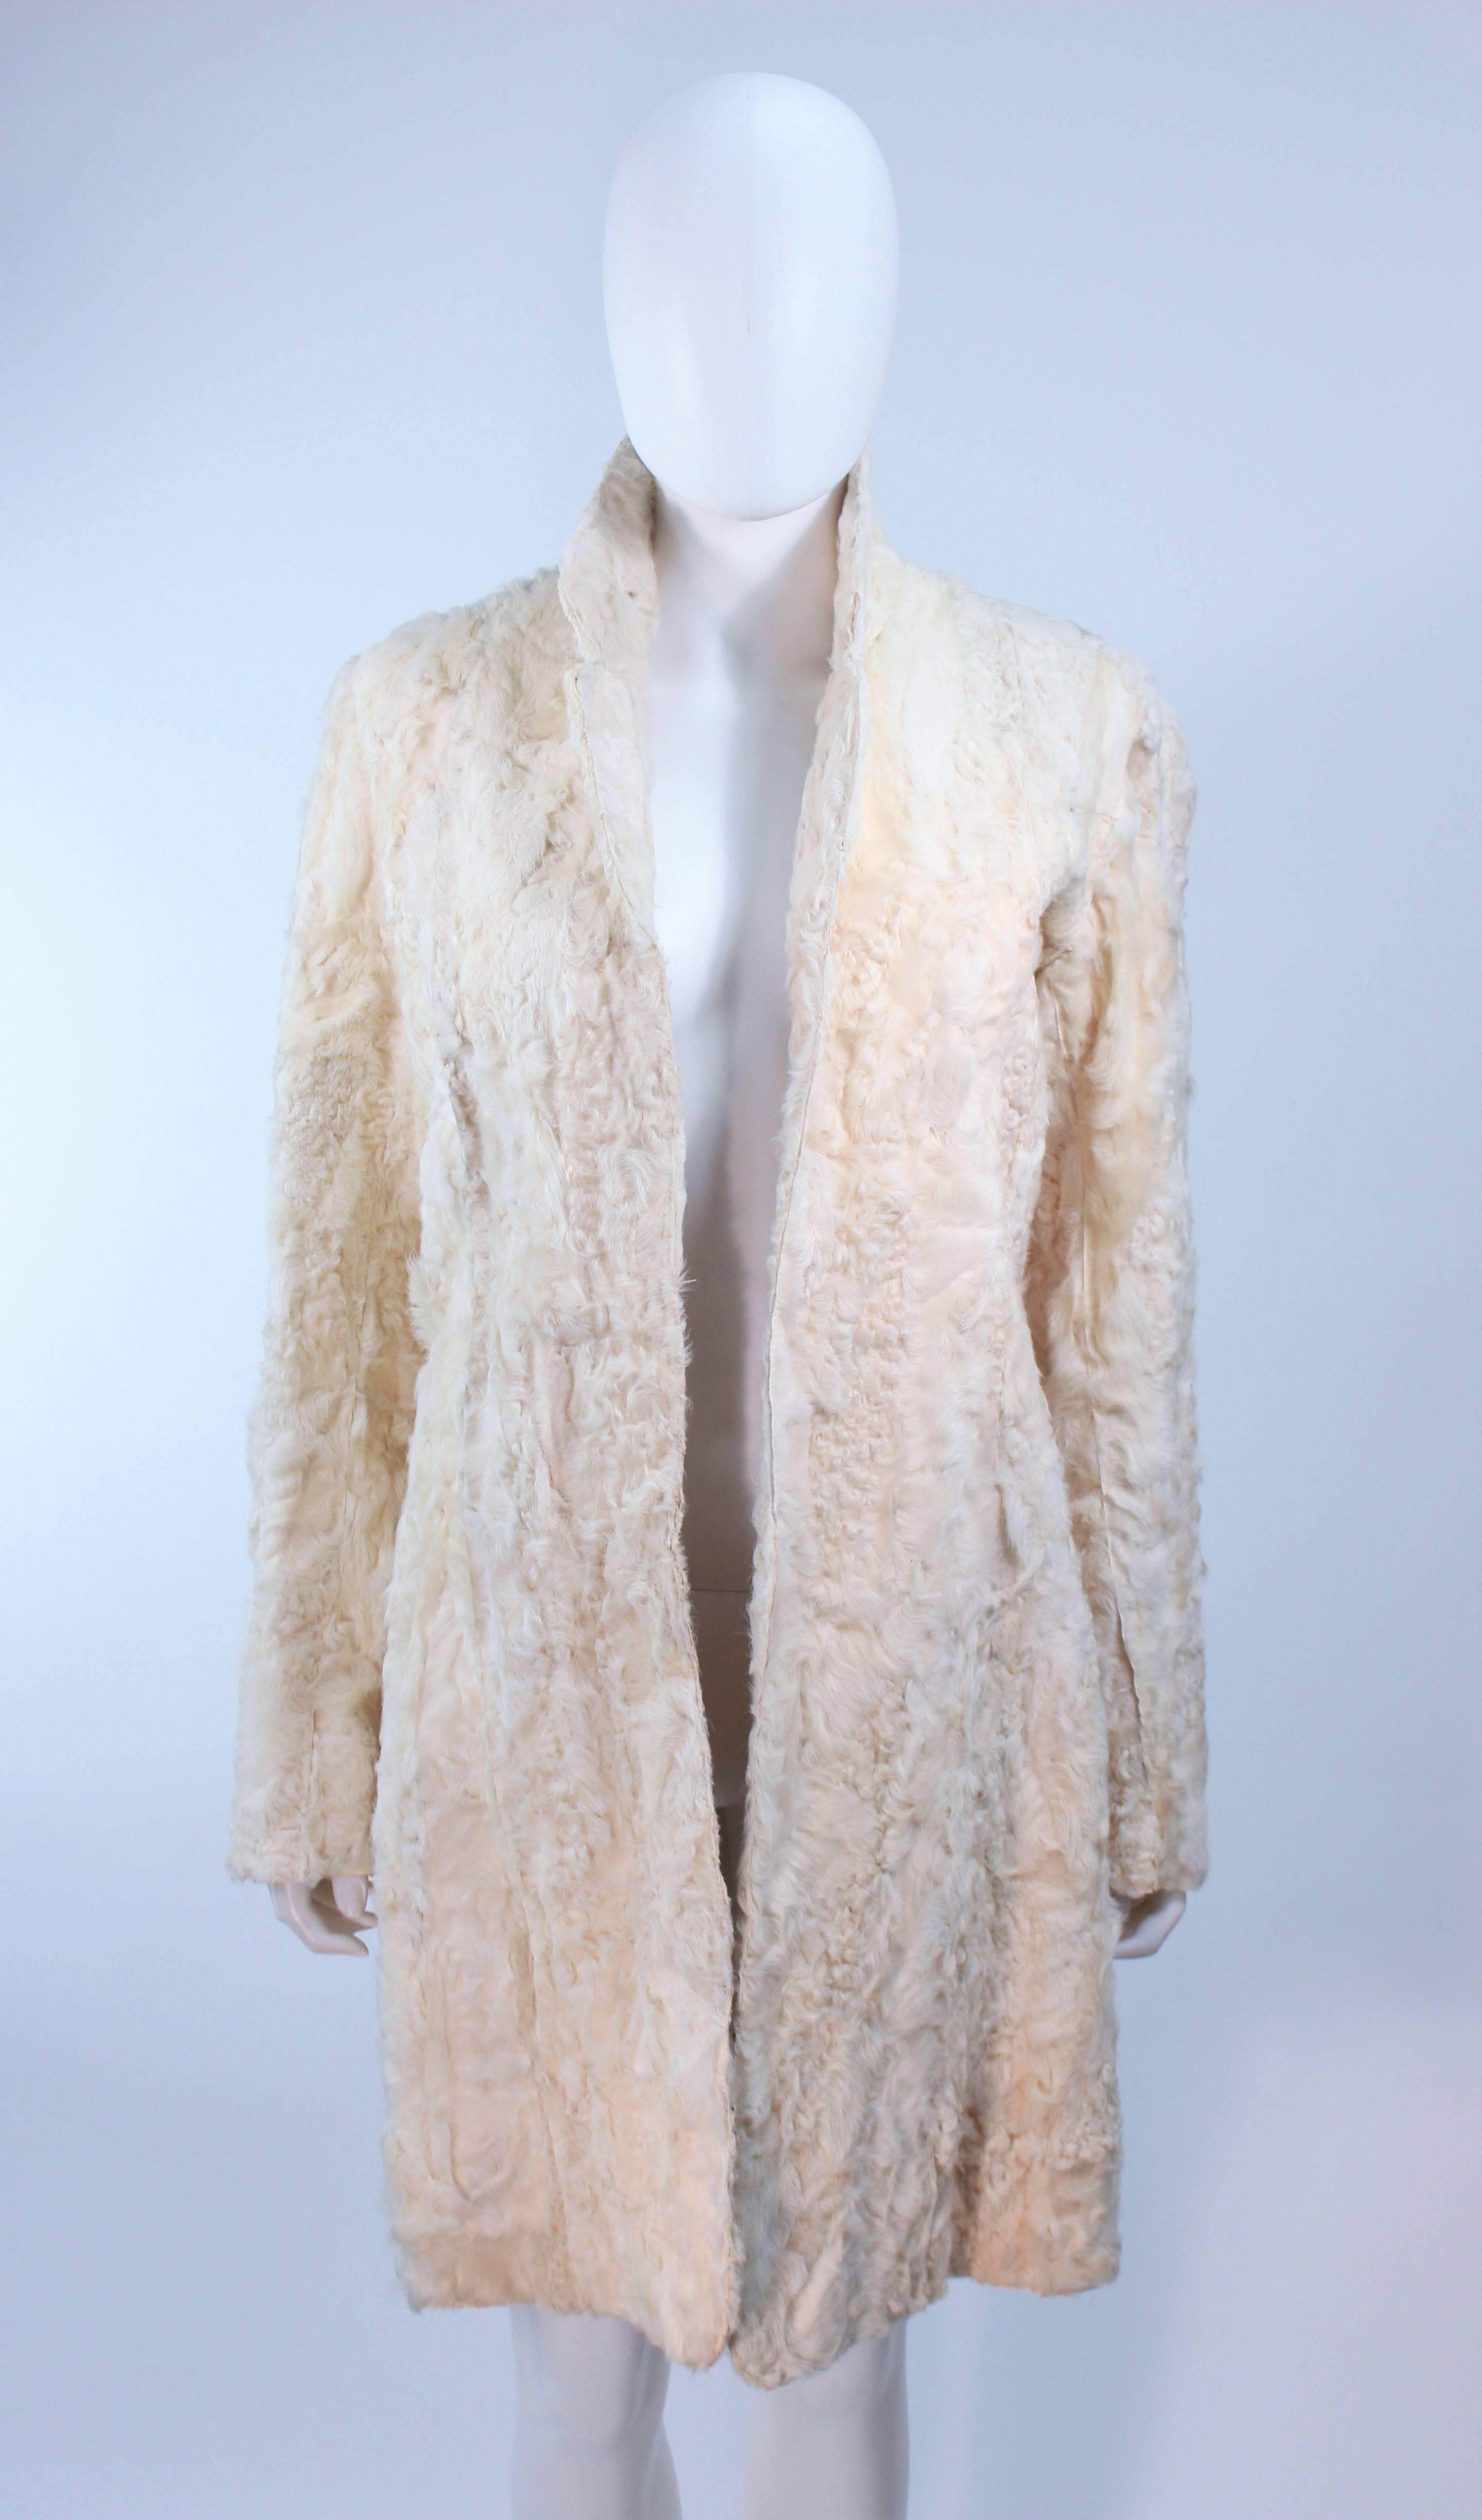 This coat is composed of a white lamb. Features an open style front with side pockets. In great vintage condition, some signs of wear.

**Please cross-reference measurements for personal accuracy. Size in description box is an